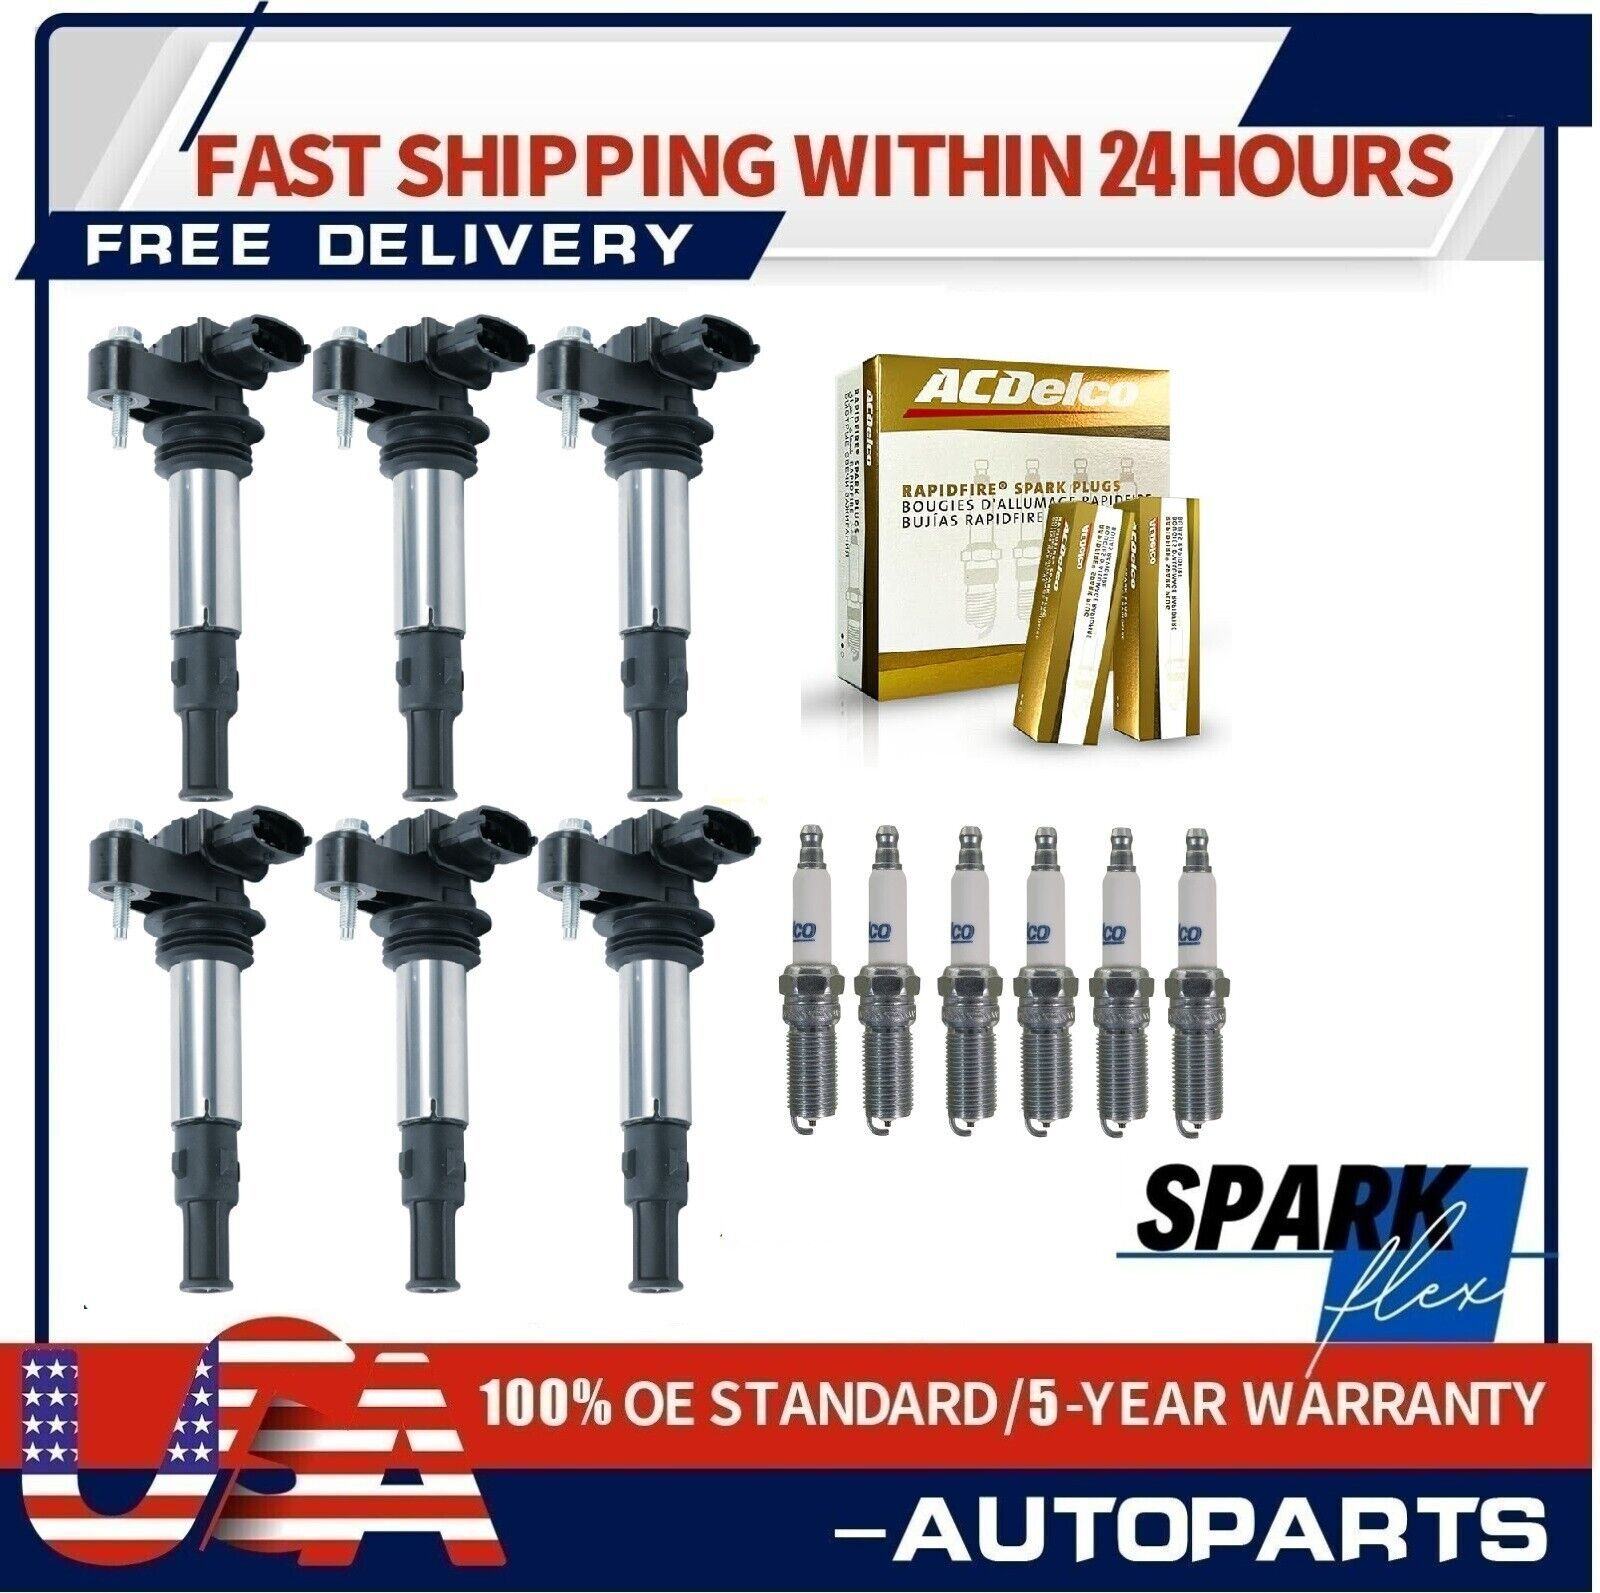 6x Ignition Coil +6x OEM Spark Plug for Buick Cadillac CTS GMC Chevrolet 3.6L